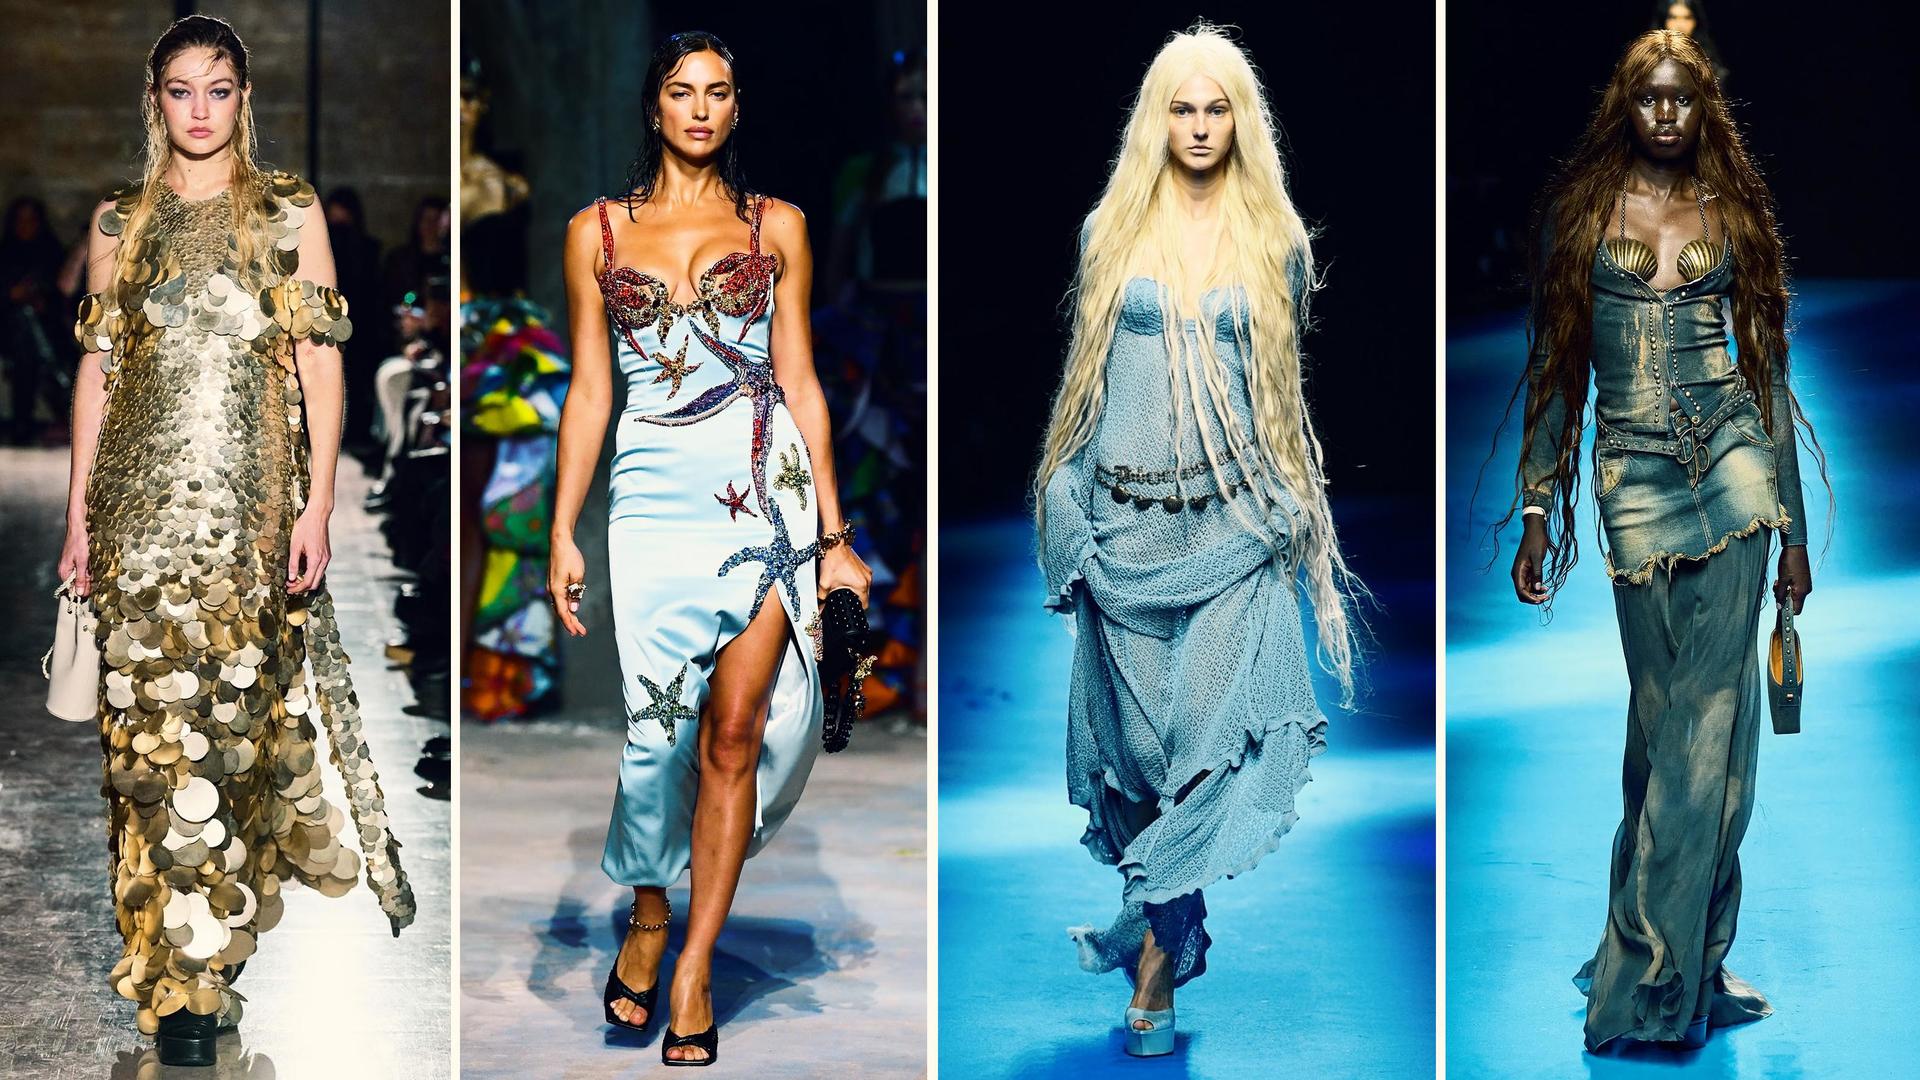 Mermaidcore: The enchanting new fashion trend you need to try